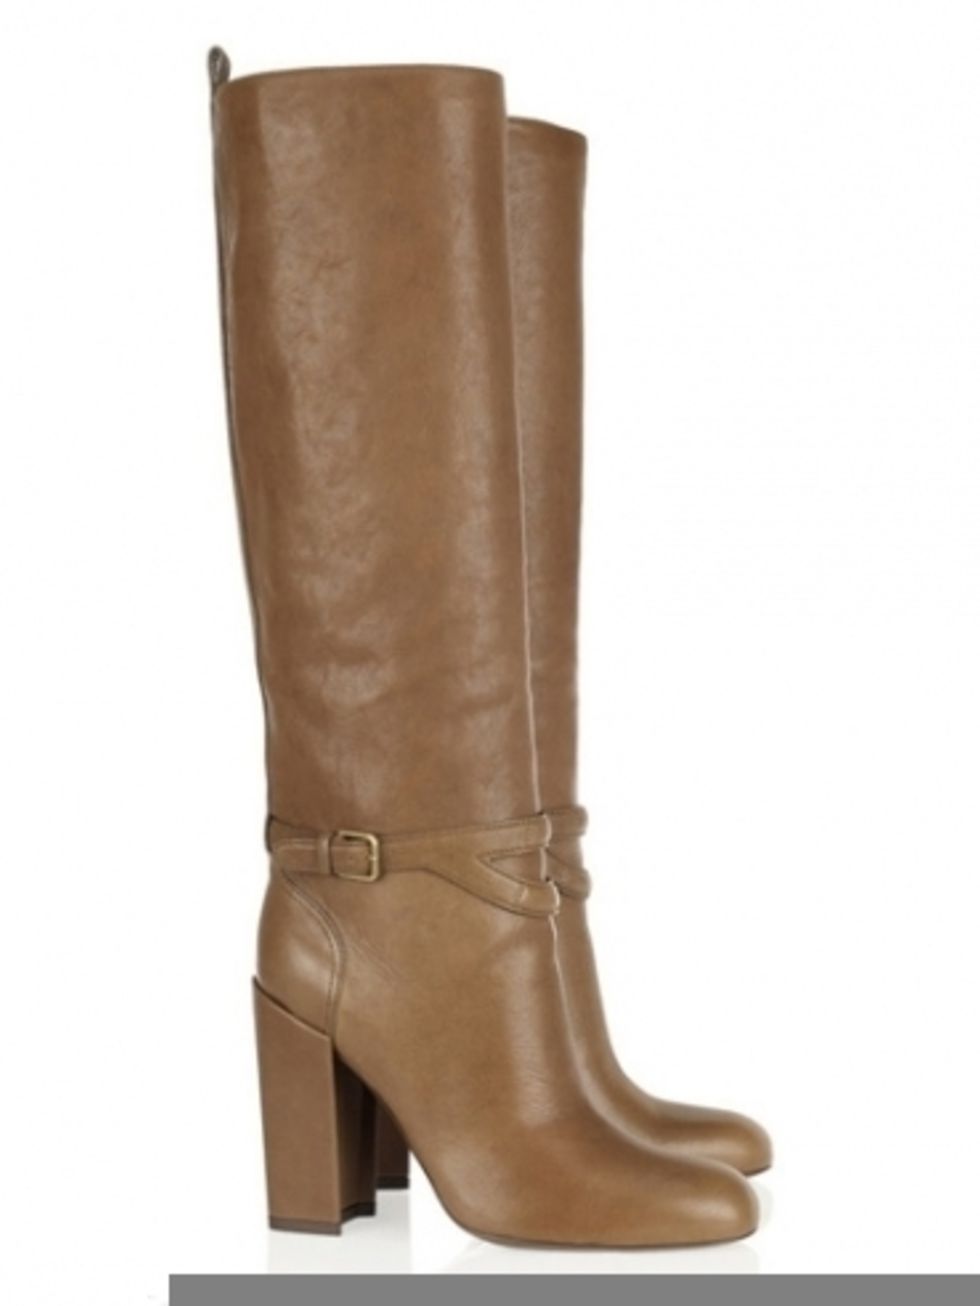 Brown, Boot, Riding boot, Tan, Leather, Fashion, Liver, Beige, Maroon, Knee-high boot, 